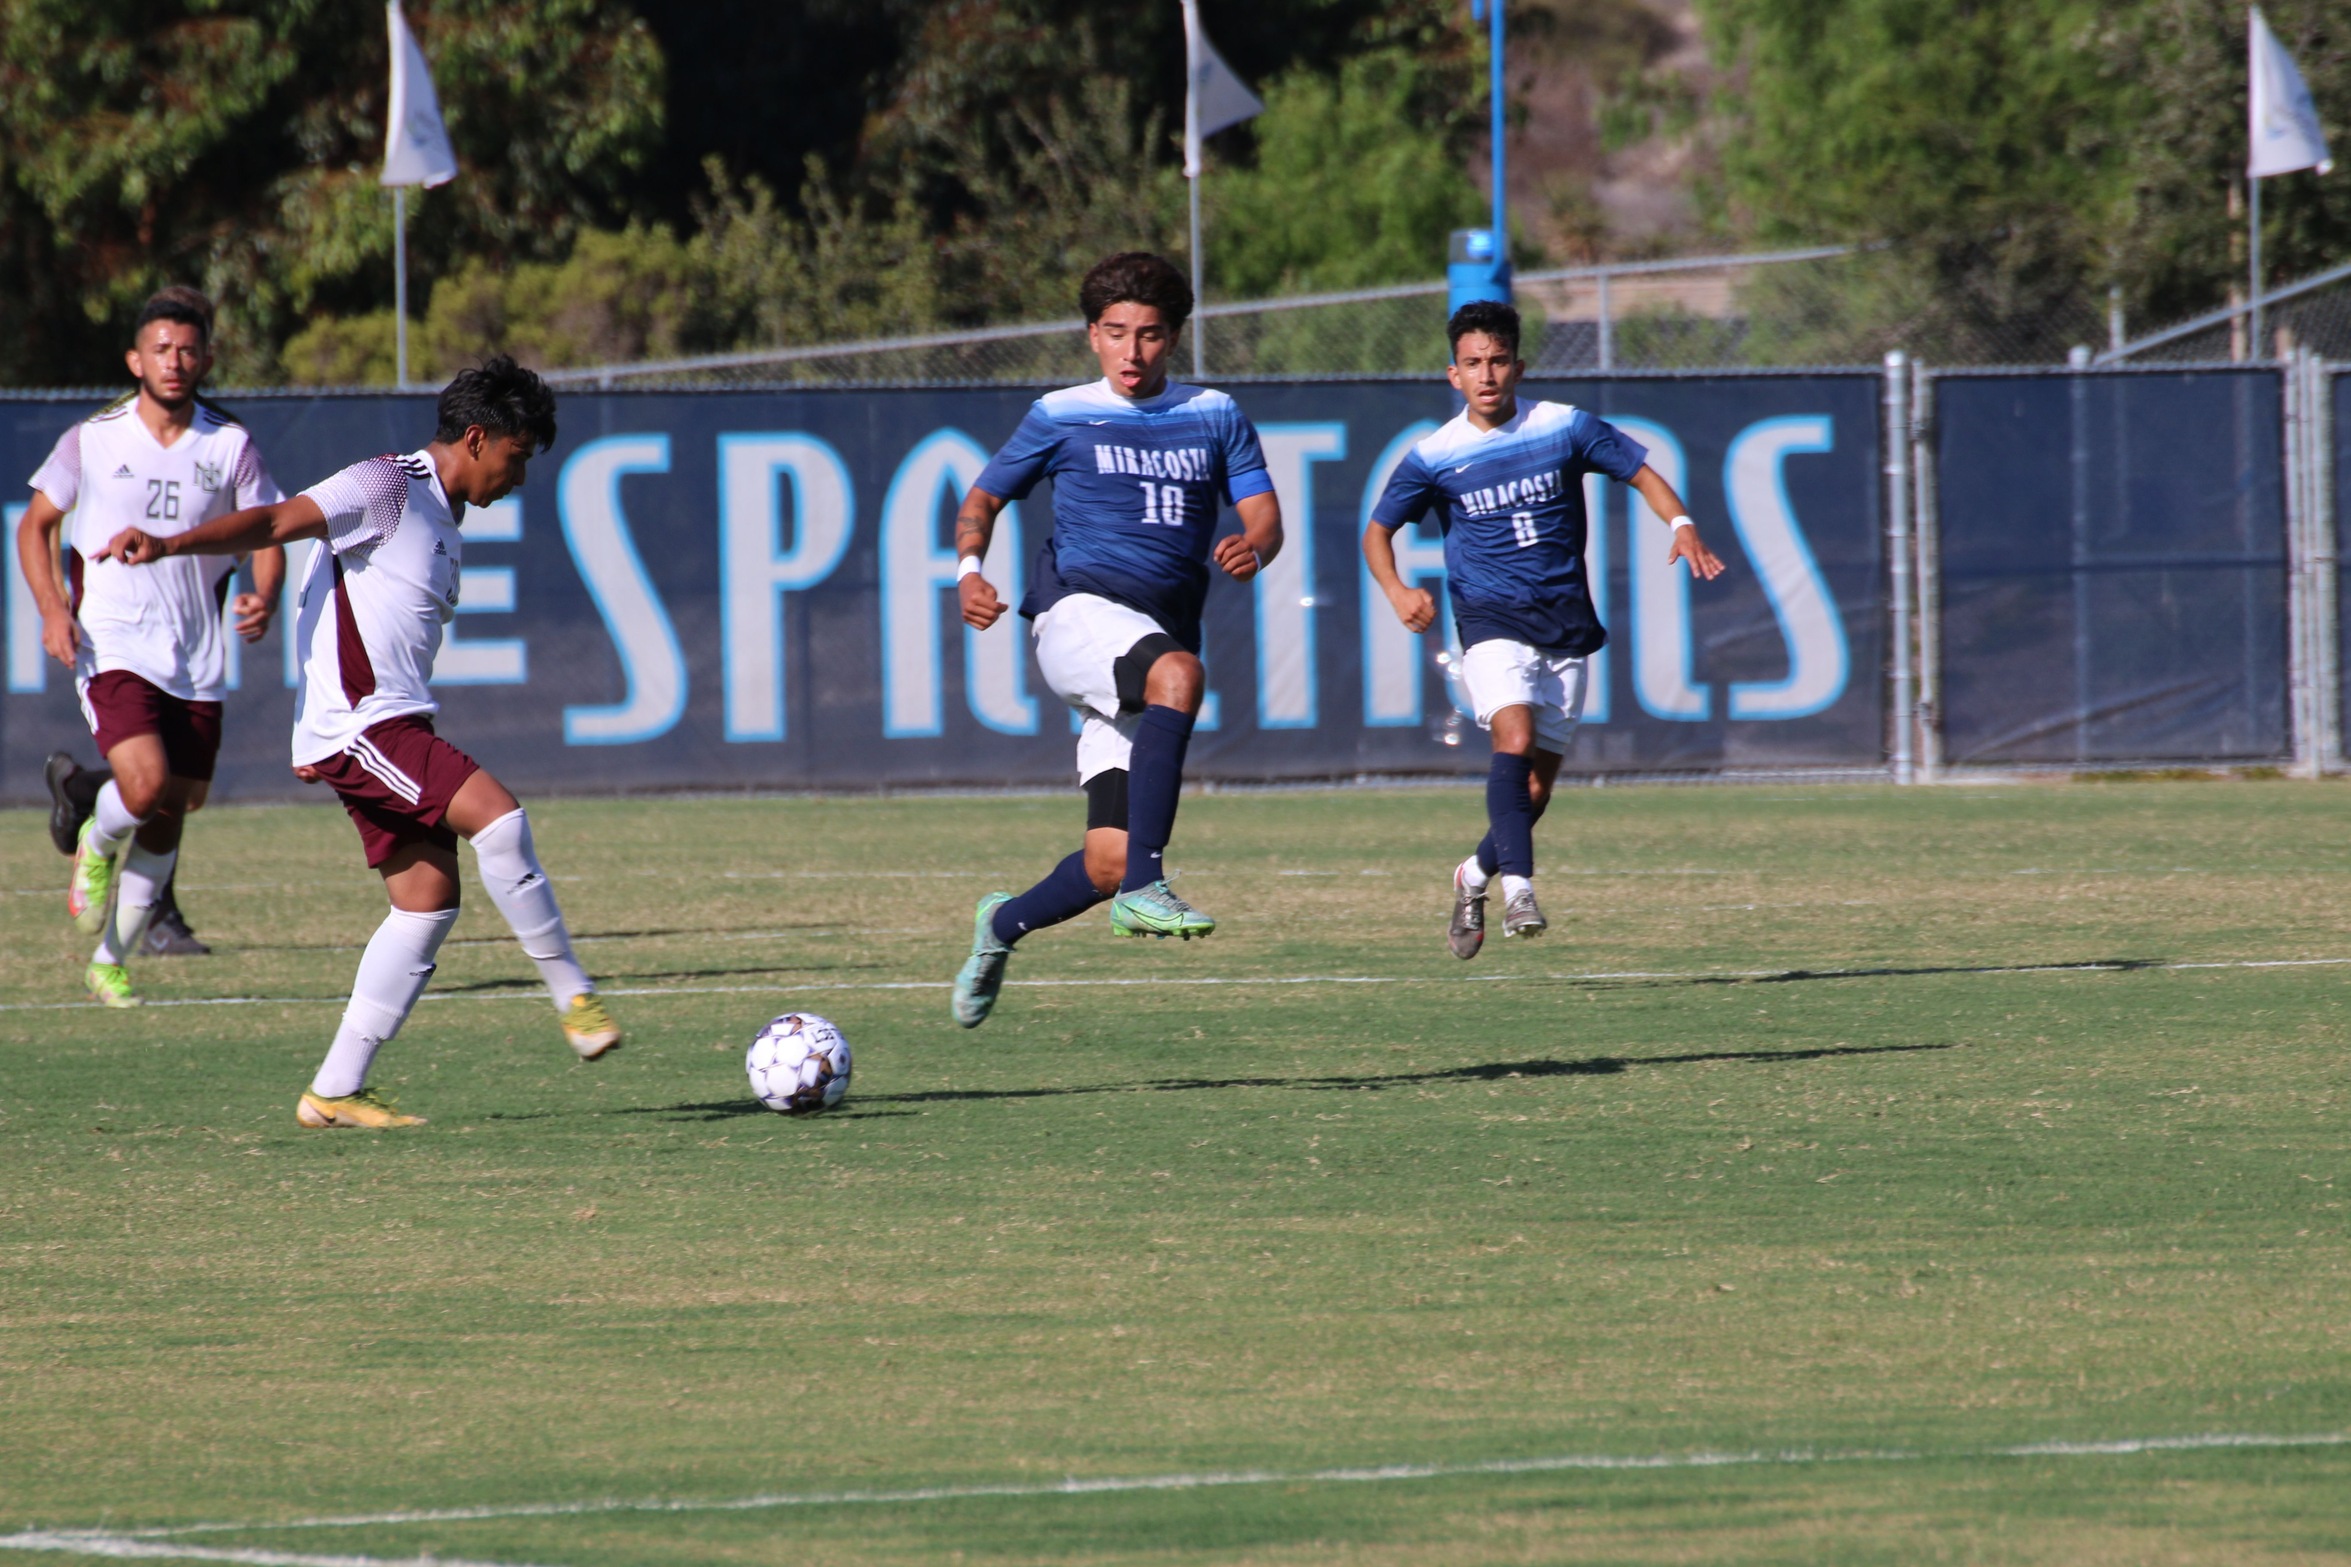 George Silva and Bryan Sahagun try to get the ball.